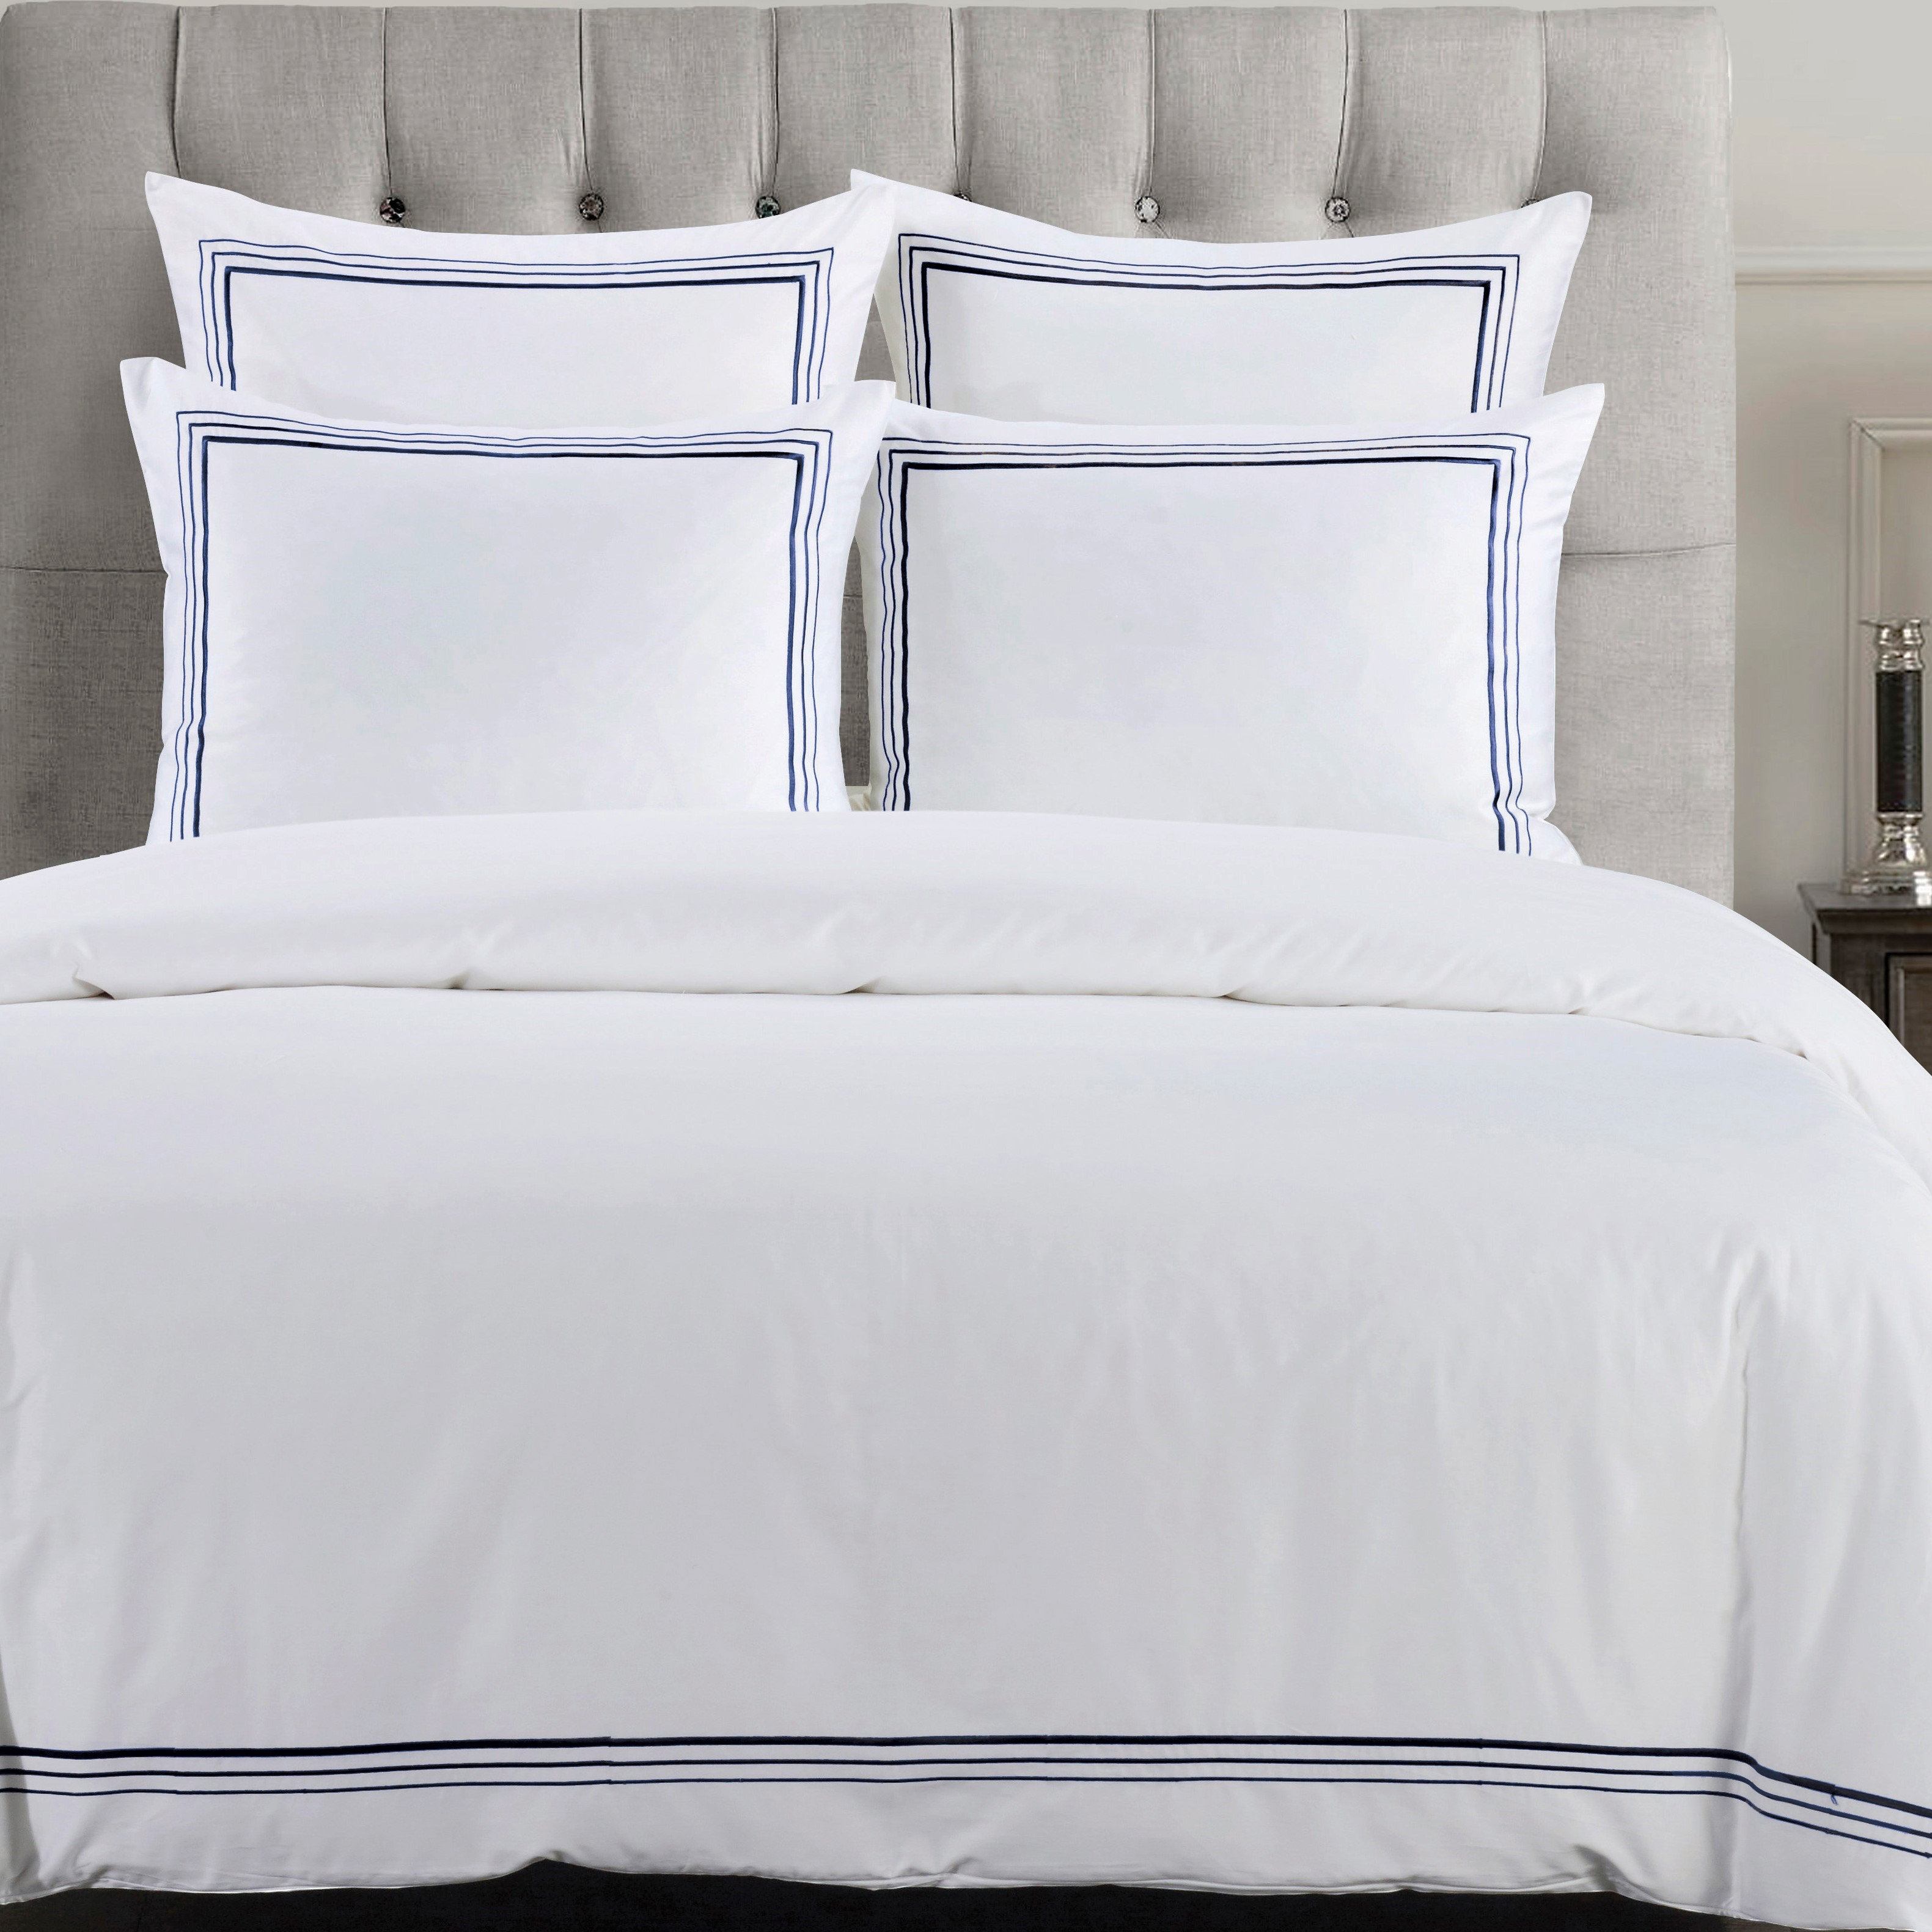 100% Linen Bedding Set With Embroidery Edge, Pin Stripe Duvet